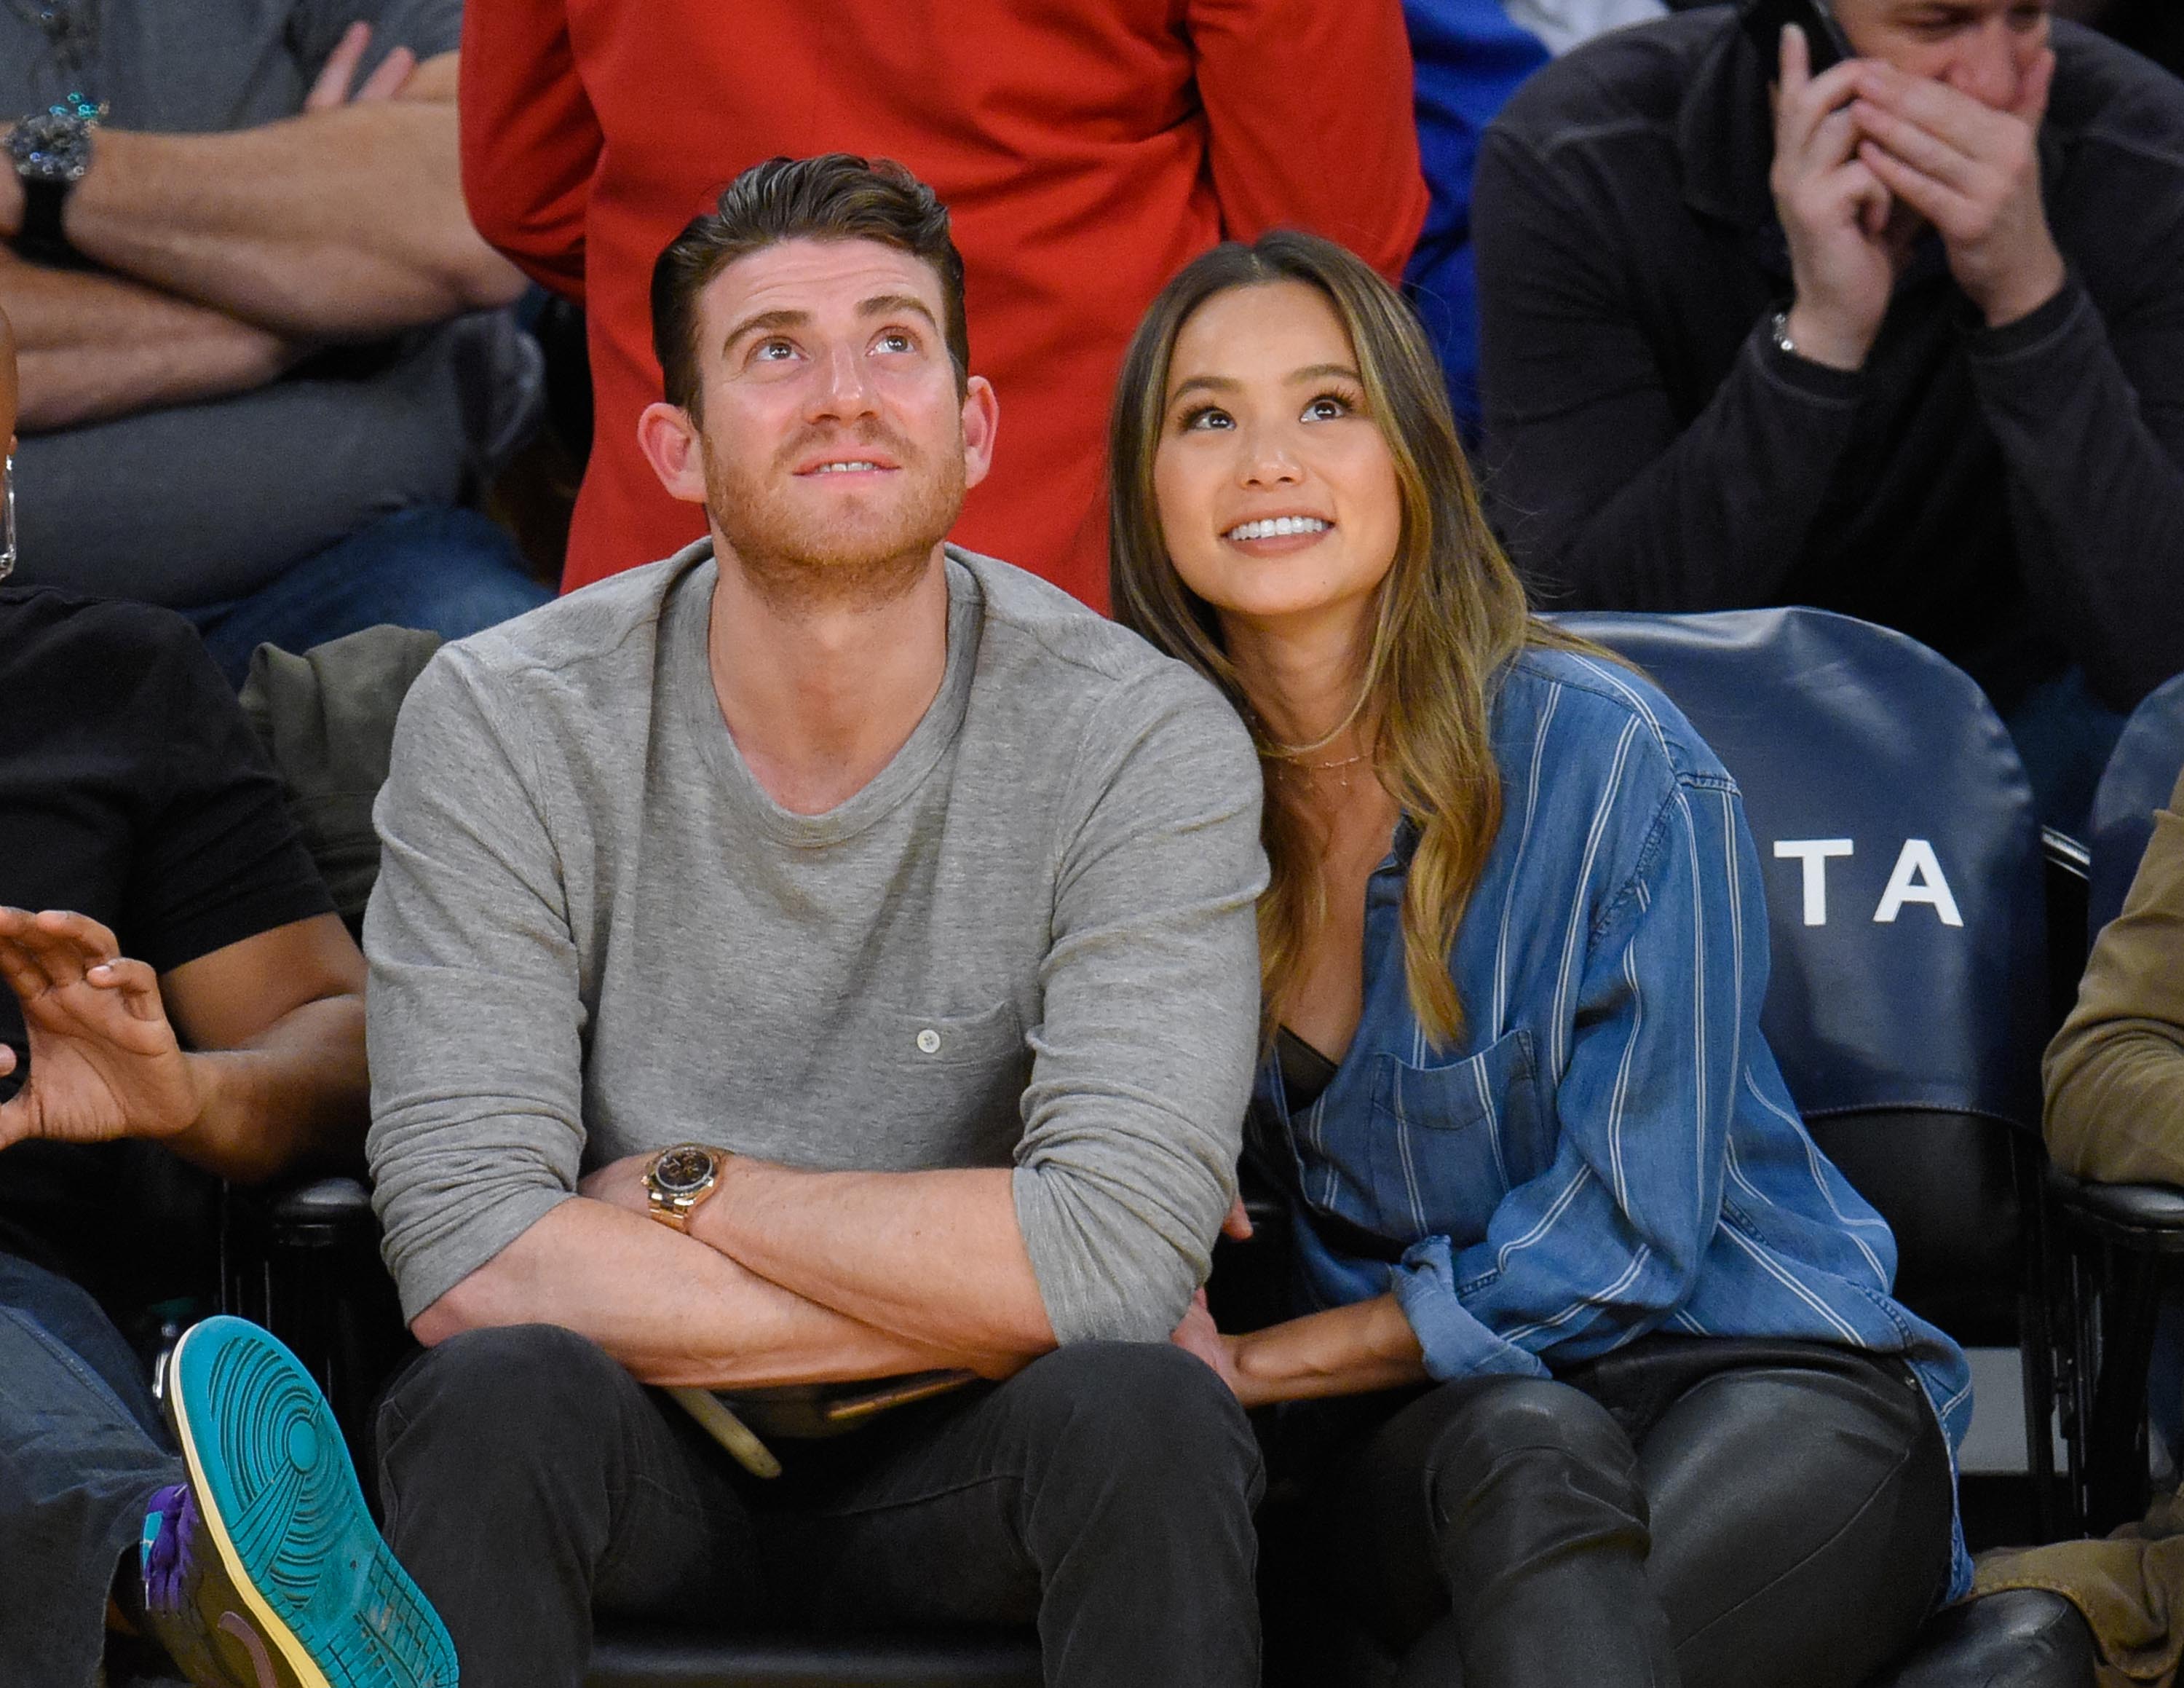 Jamie Chung attends a basketball game